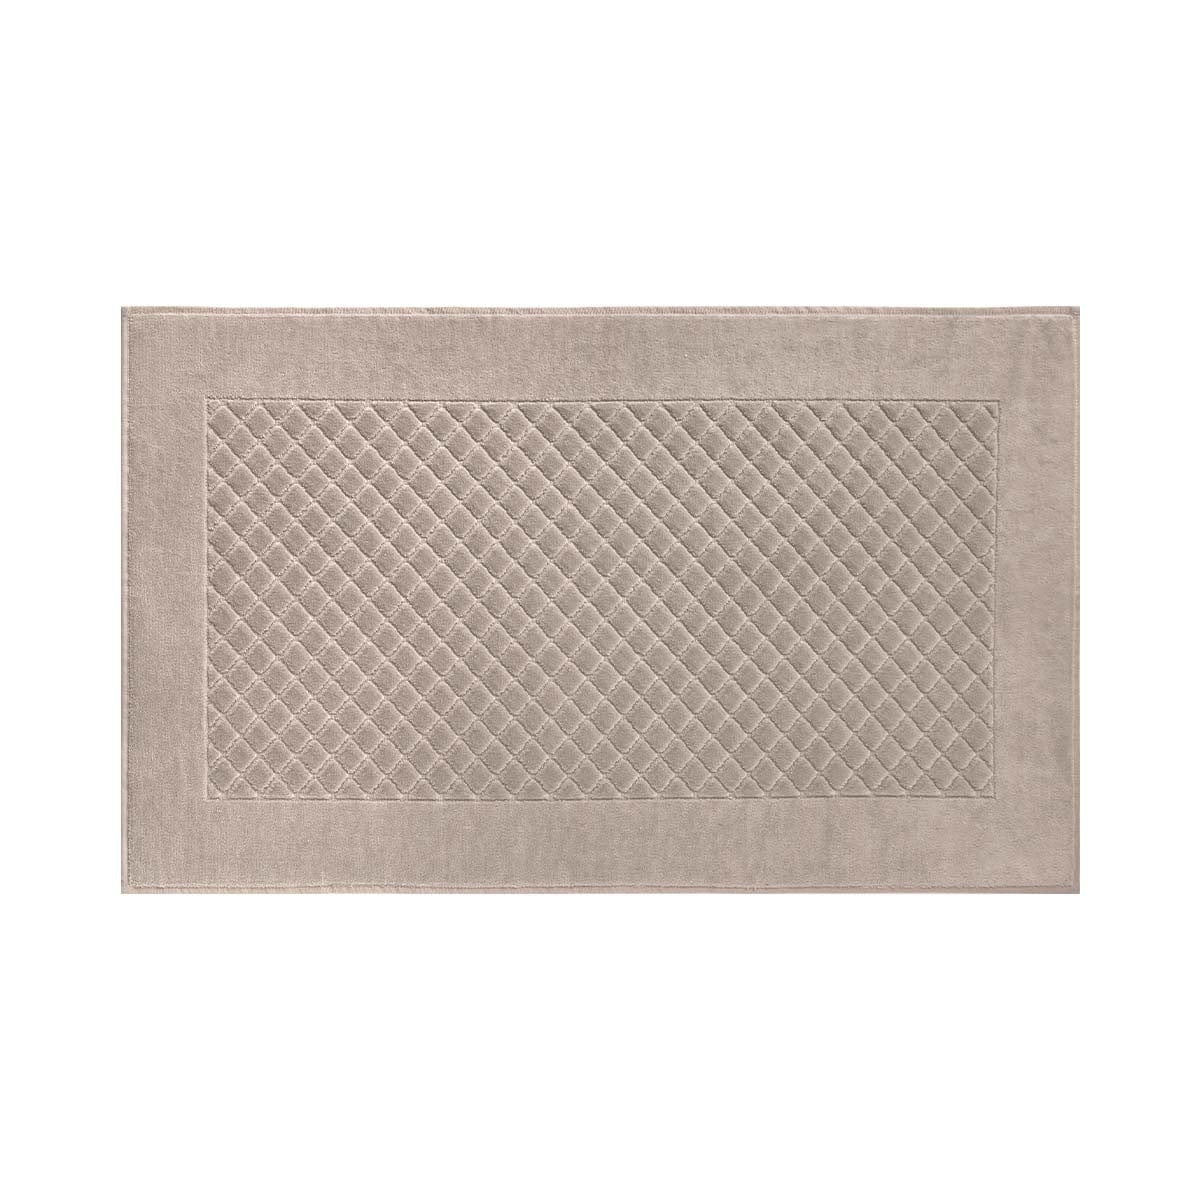 Mats & Rugs Etoile Bath Mat by Yves Delorme Pierre Yves Delorme